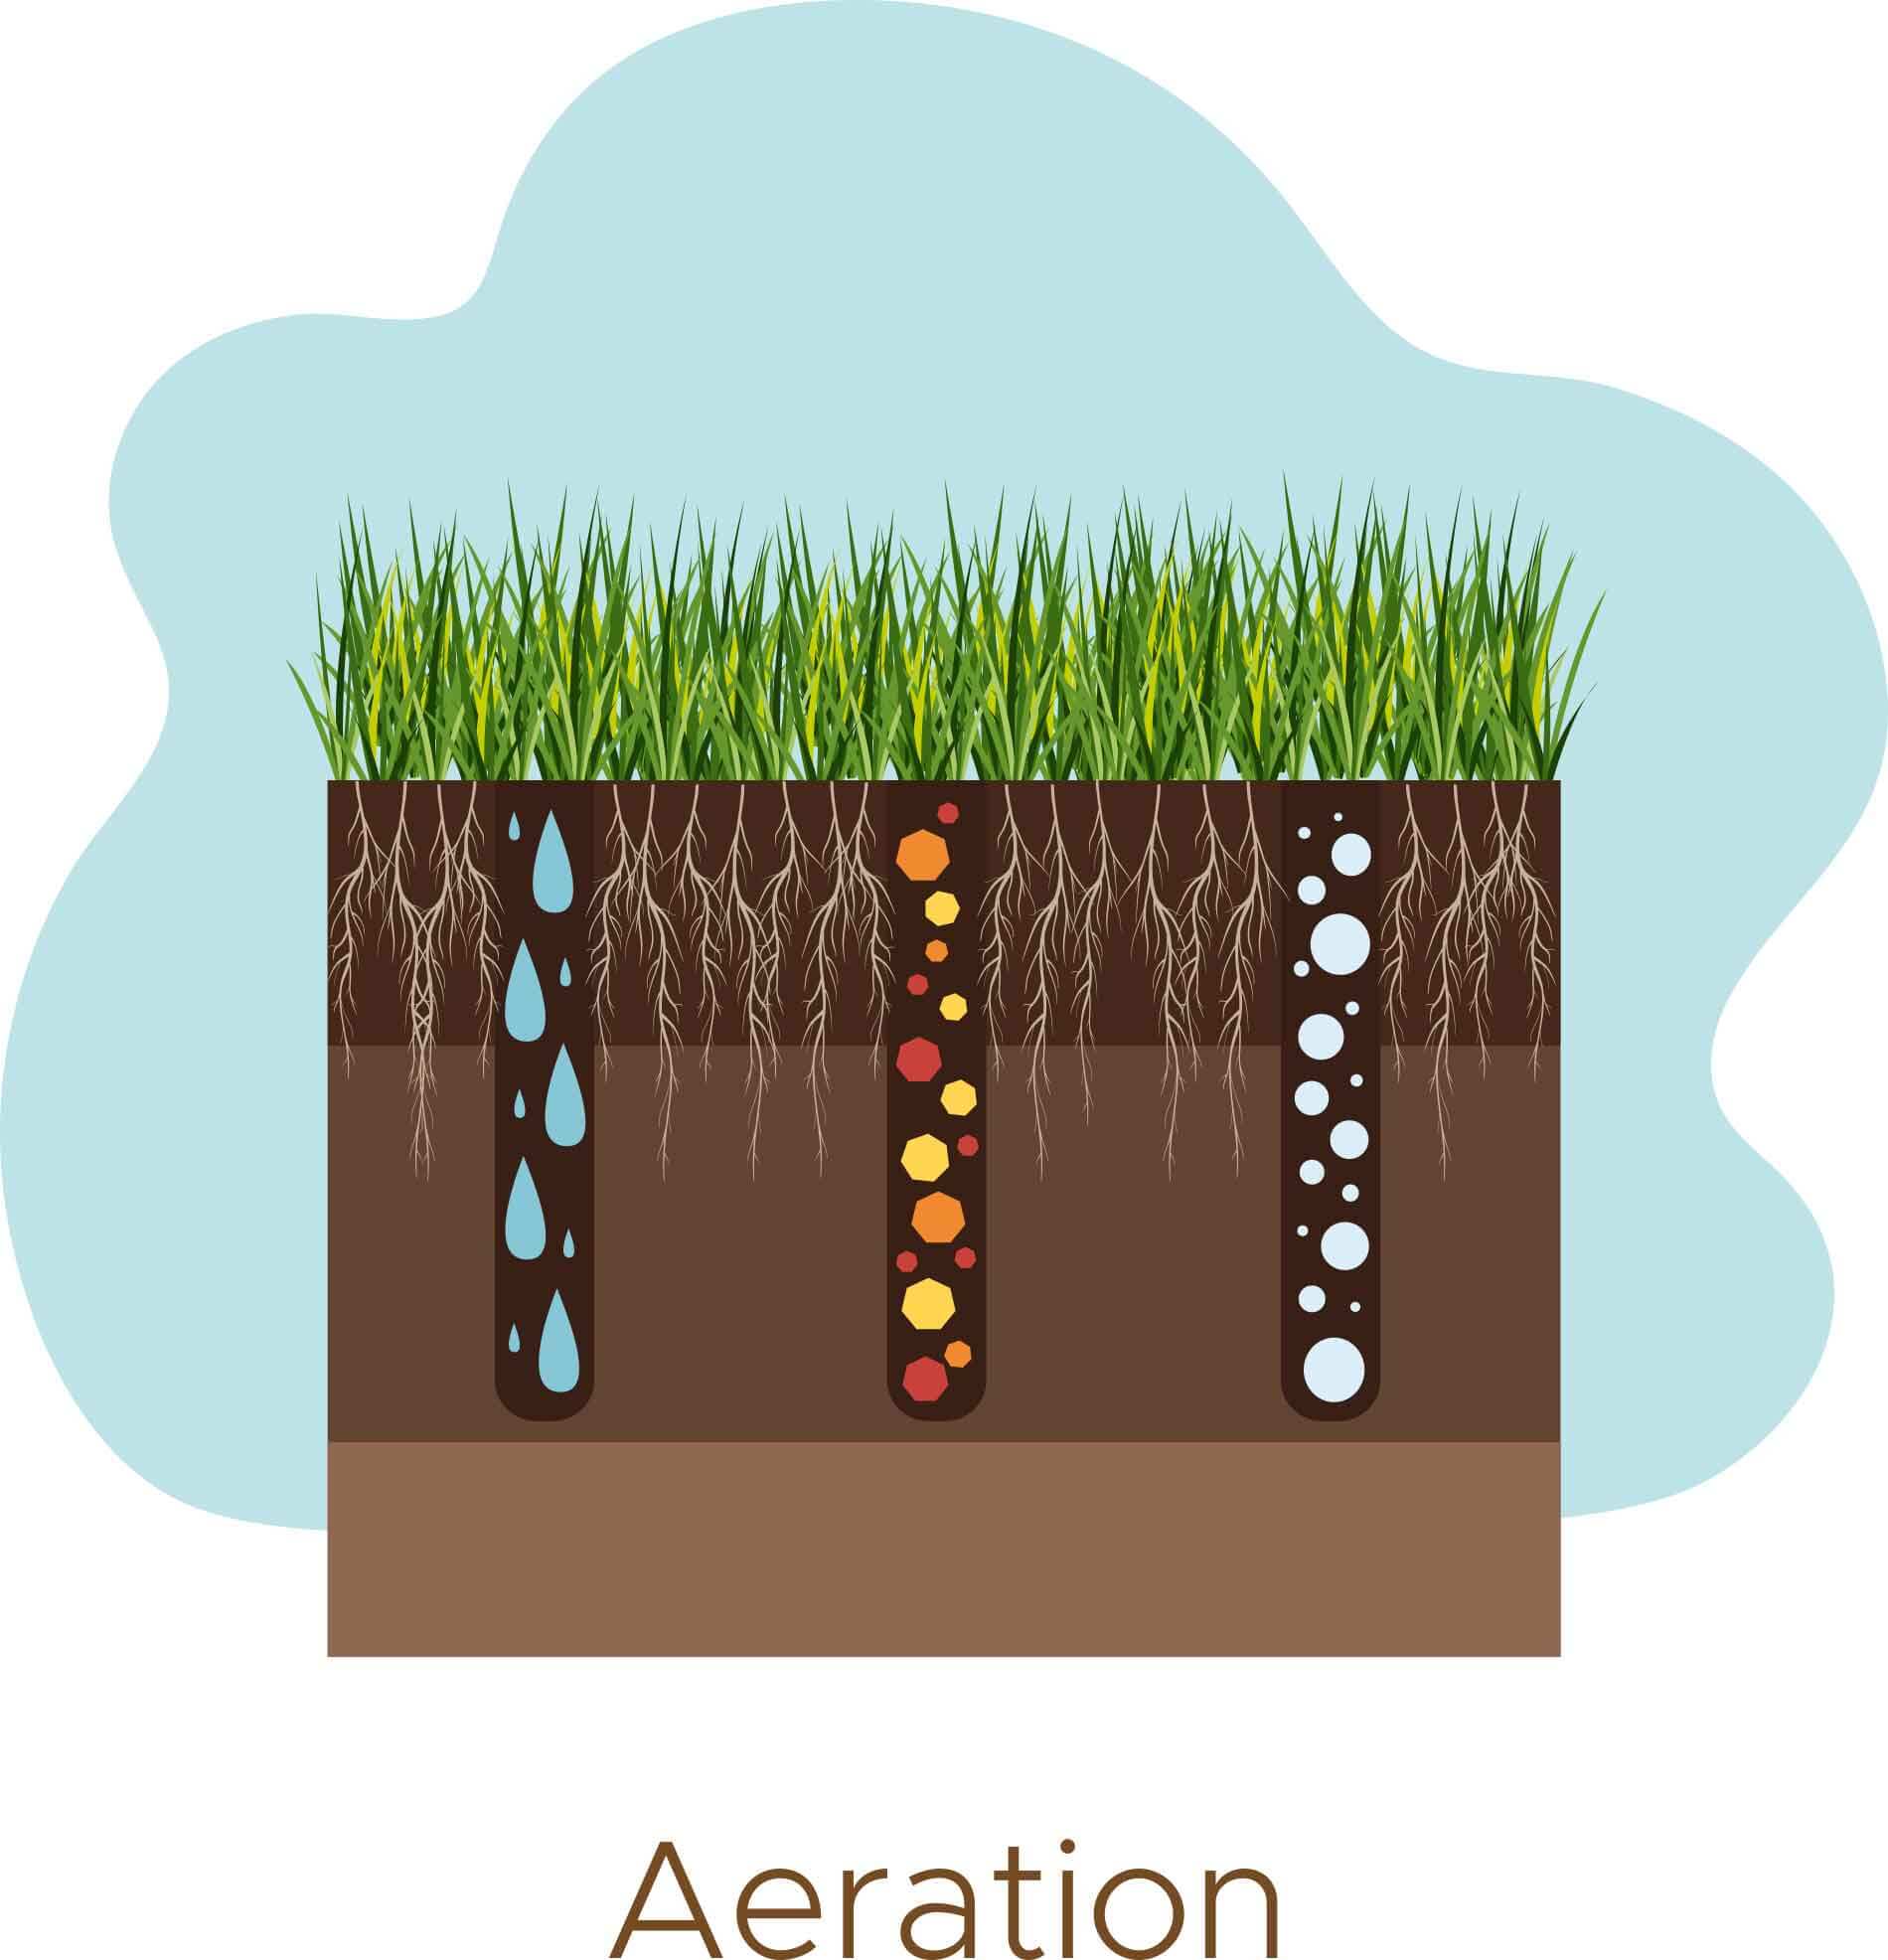 Aerating Lawns A-Z Landscaping